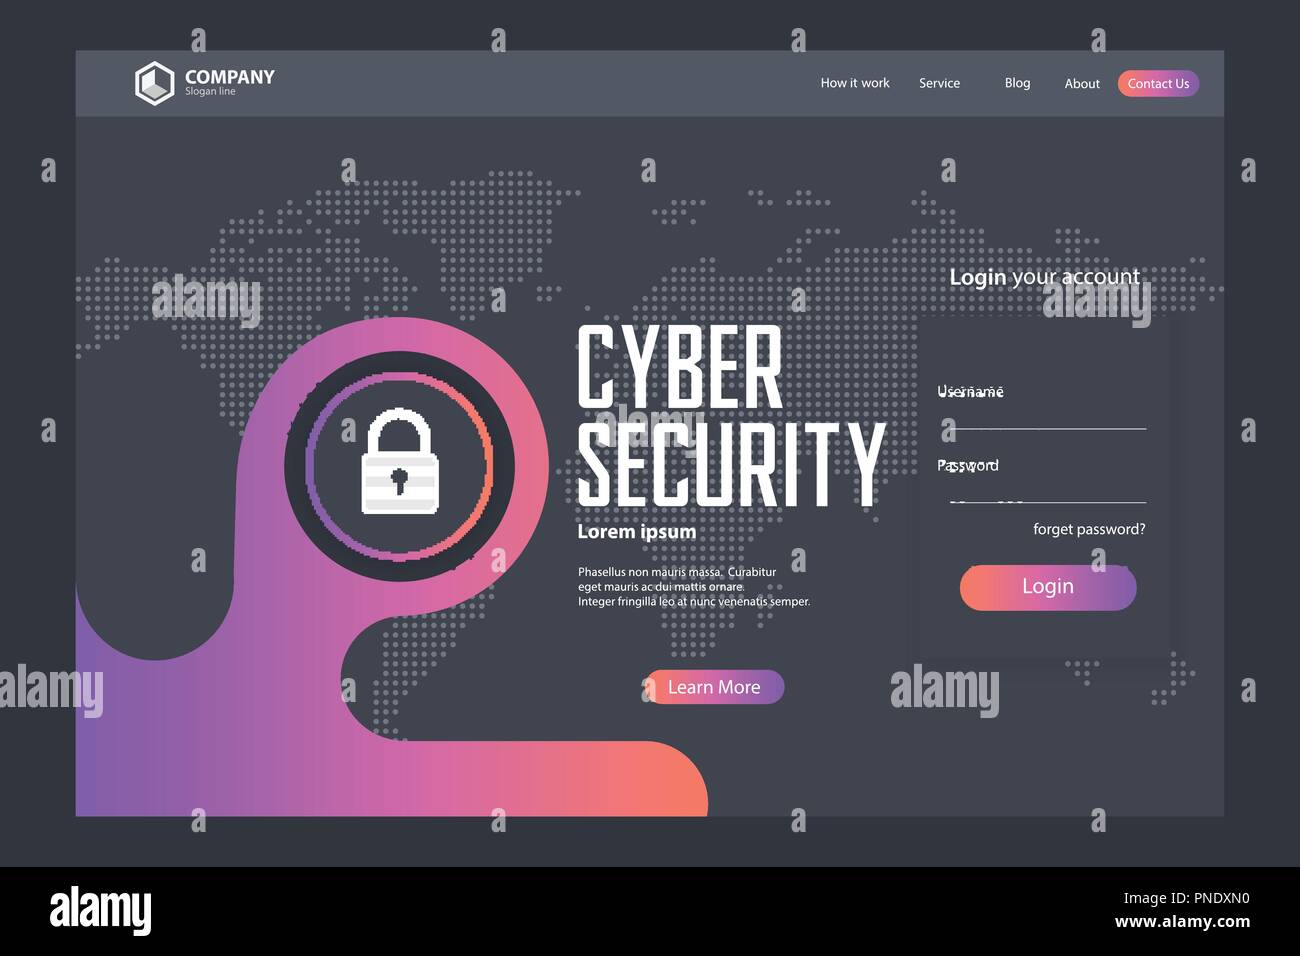 Cyber Security Landing Page Vector Template Design Stock Vector